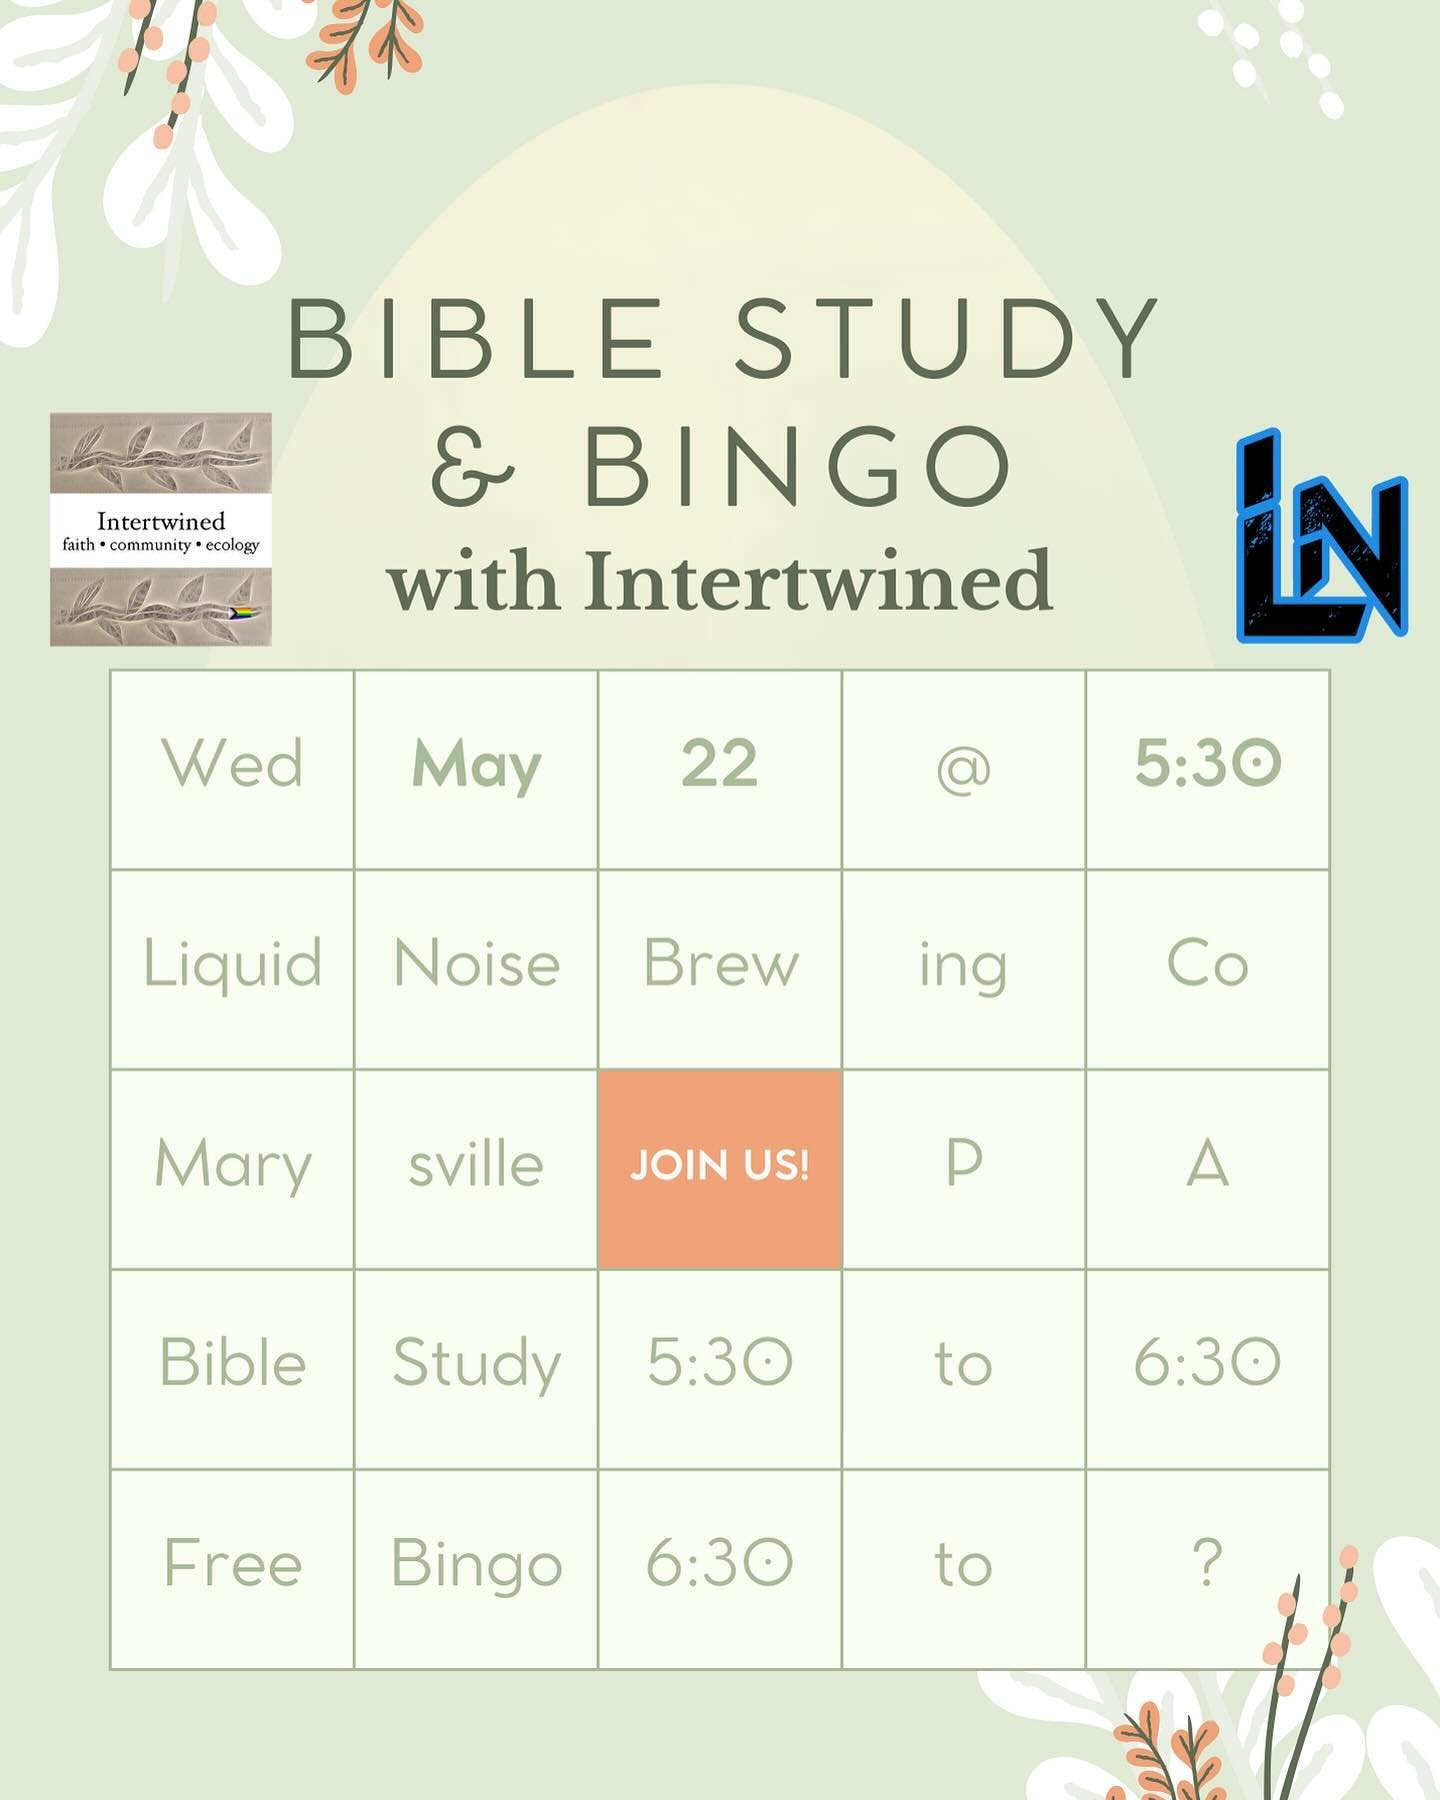 Join us Wednesday at 5:30pm for a Bible Study, then stay for the weekly Liquid Noise bingo game at 6:30! What questions do you have about the Bible that you&rsquo;ve never asked? Are there any passages you find challenging? How did this collection of